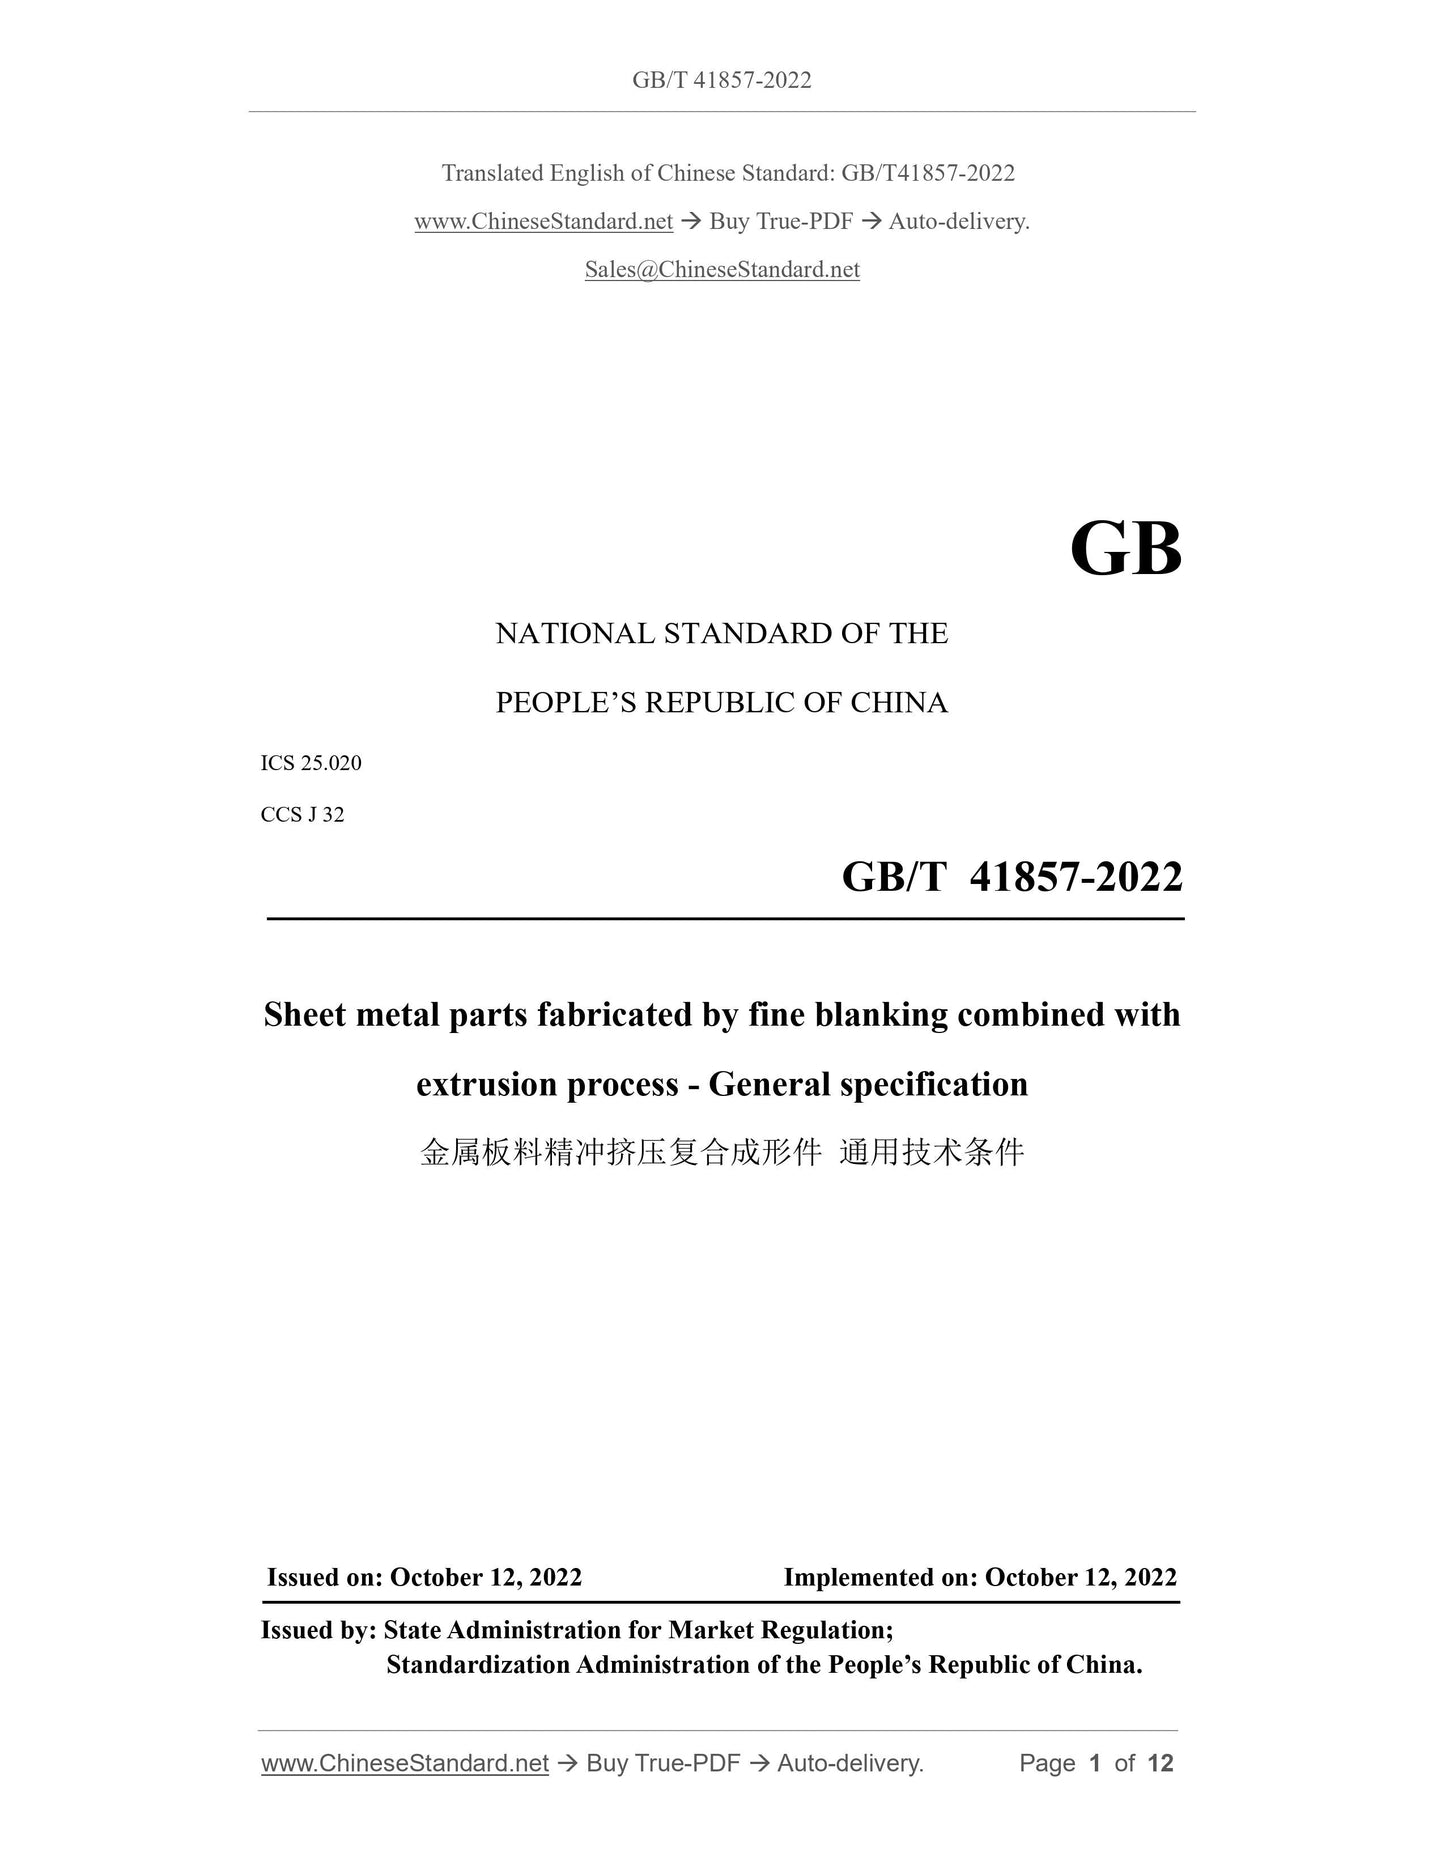 GB/T 41857-2022 Page 1